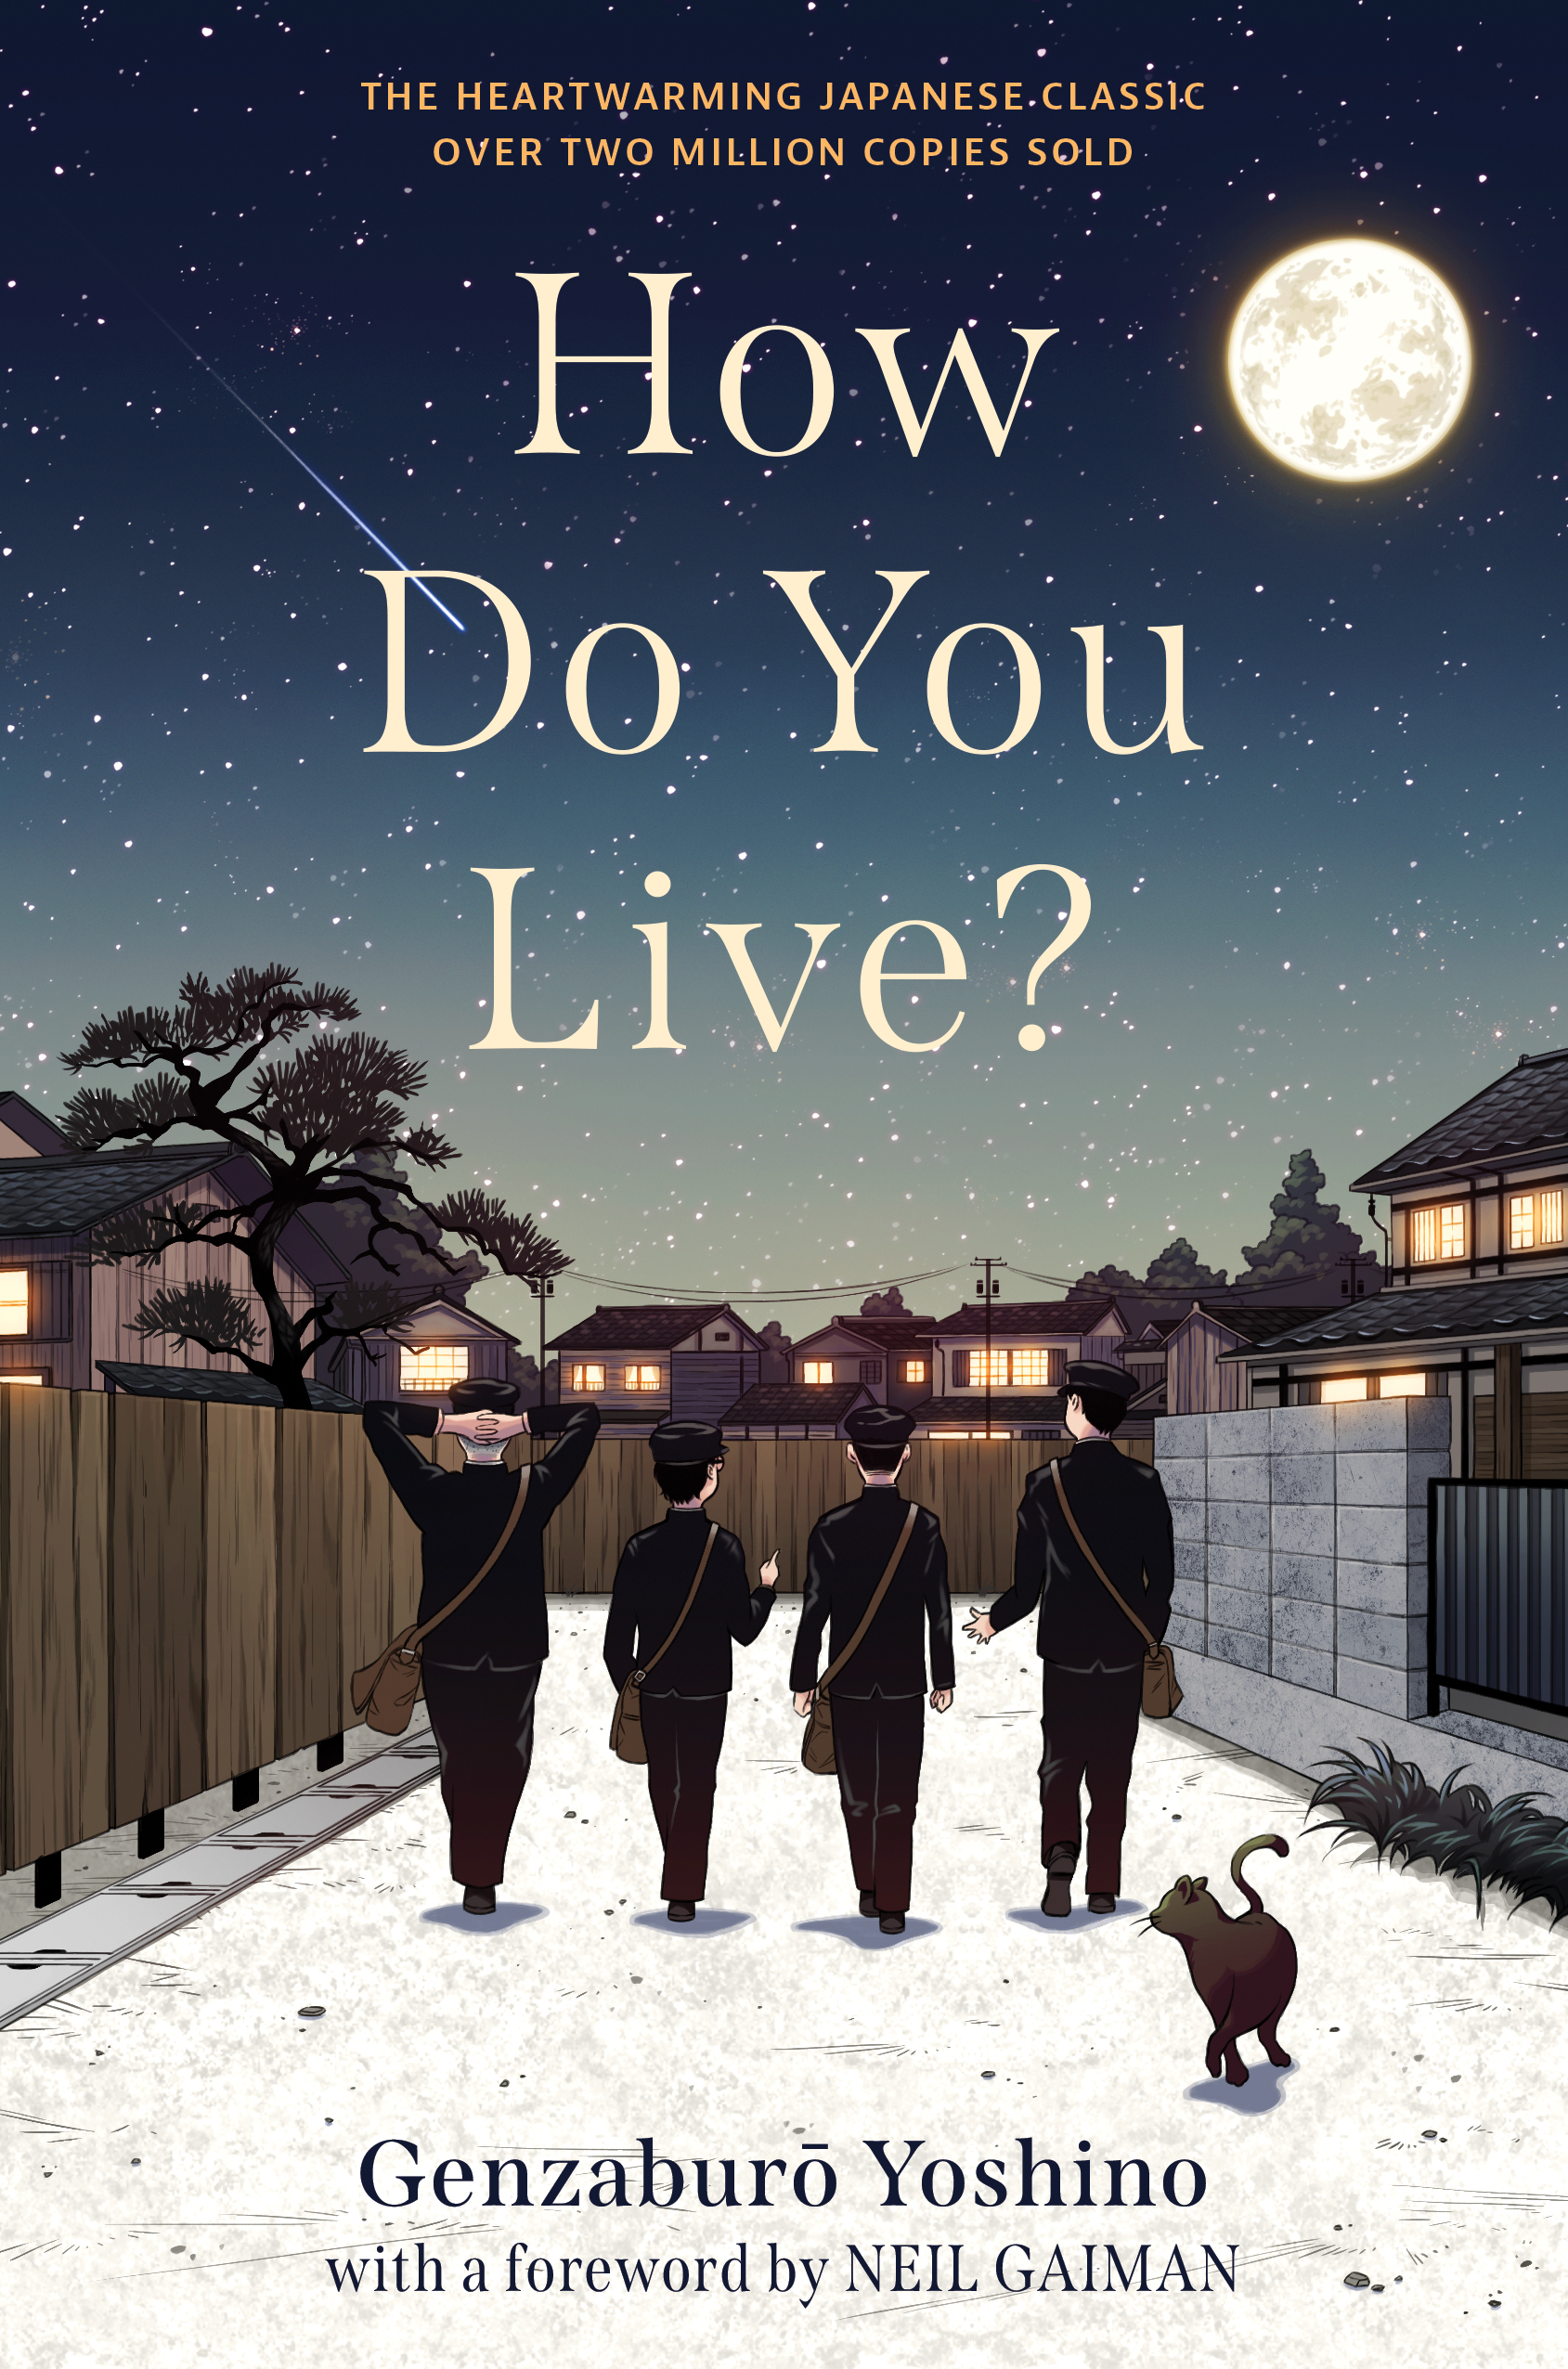 #Hayao Miyazaki’s Final Ghibli film ‘How Do You Live’ just premiered in Japan | When will it come out in the U.S.?